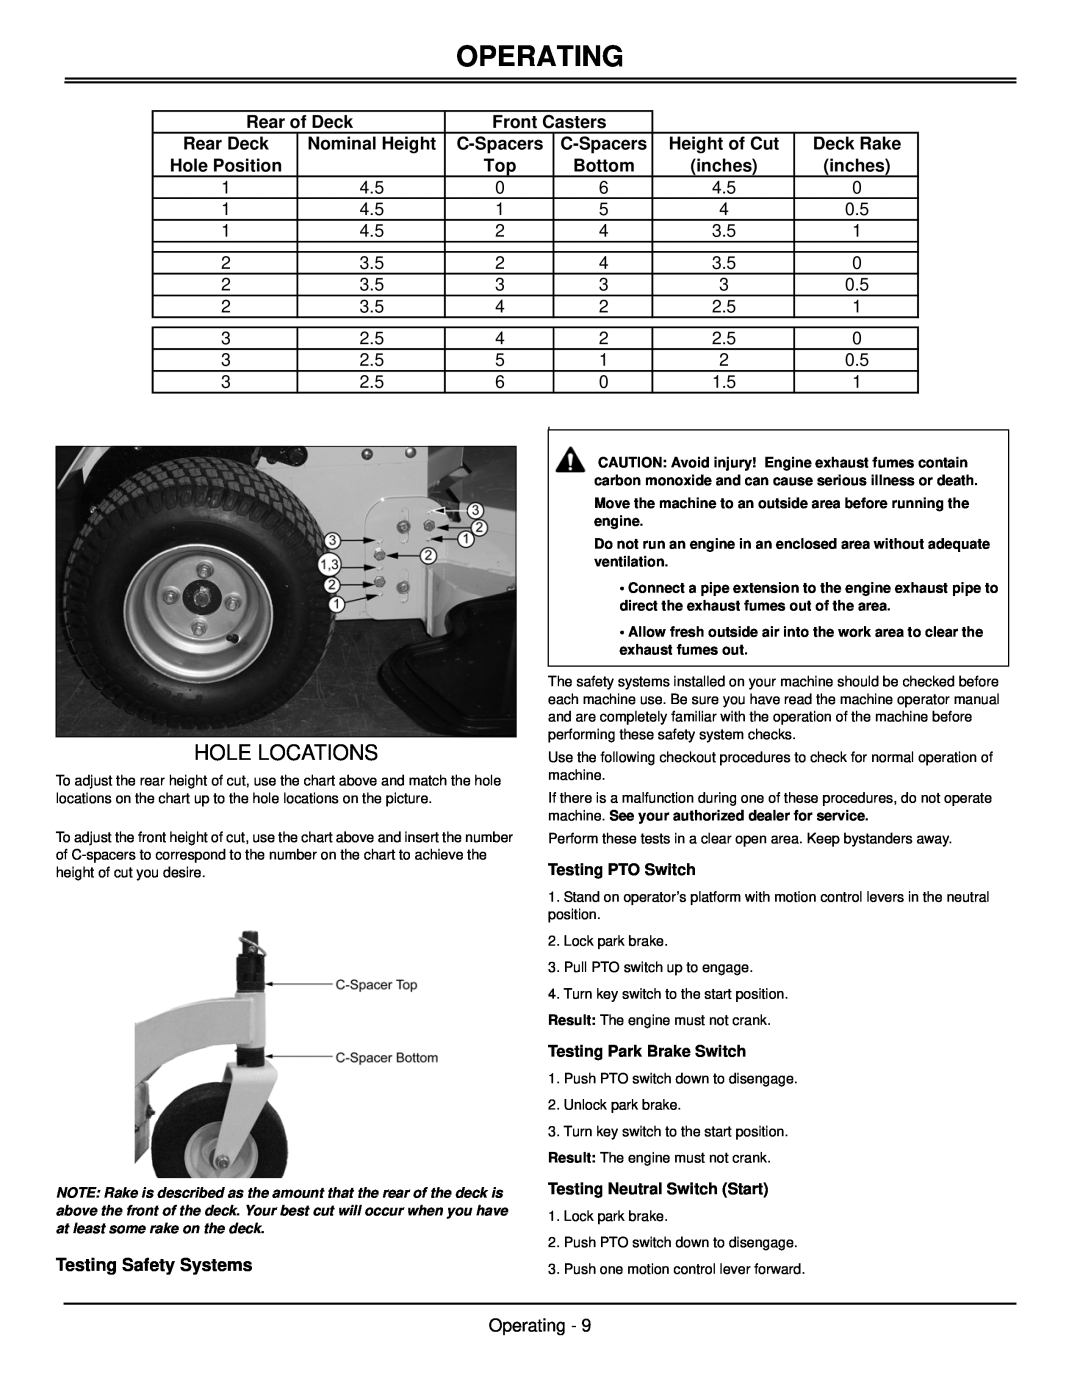 Great Dane GSRKW2352S Hole Locations, Rear of Deck, Front Casters, Rear Deck, Nominal Height, C-Spacers, Height of Cut 